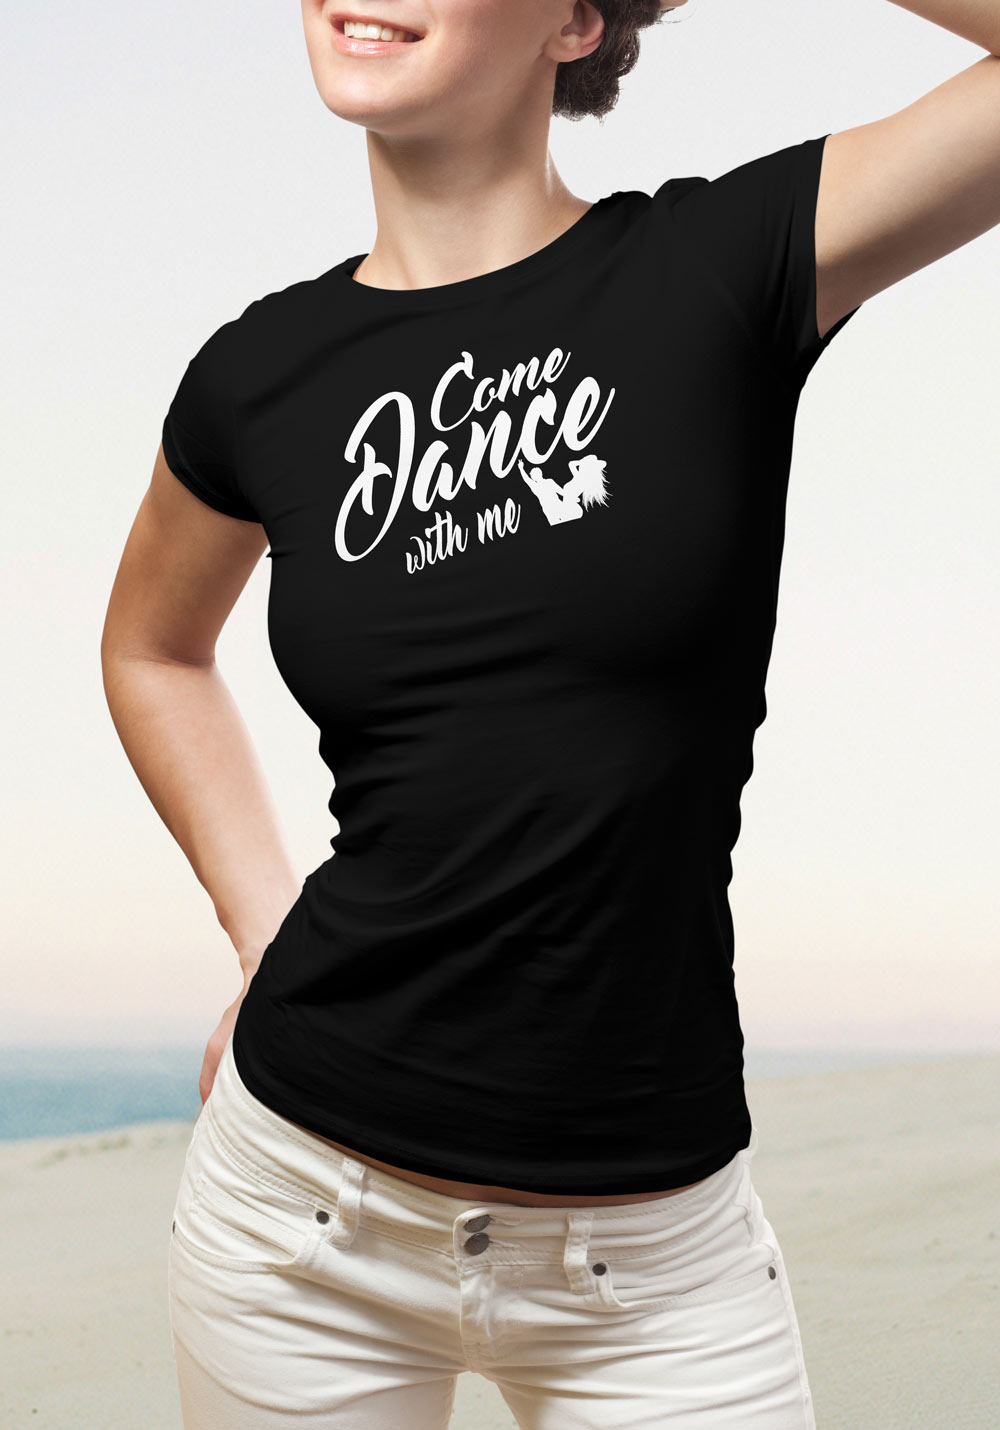 Woman wearing Zouk T-shirt decorated with unique “Come Dance with me” design in black crew neck style